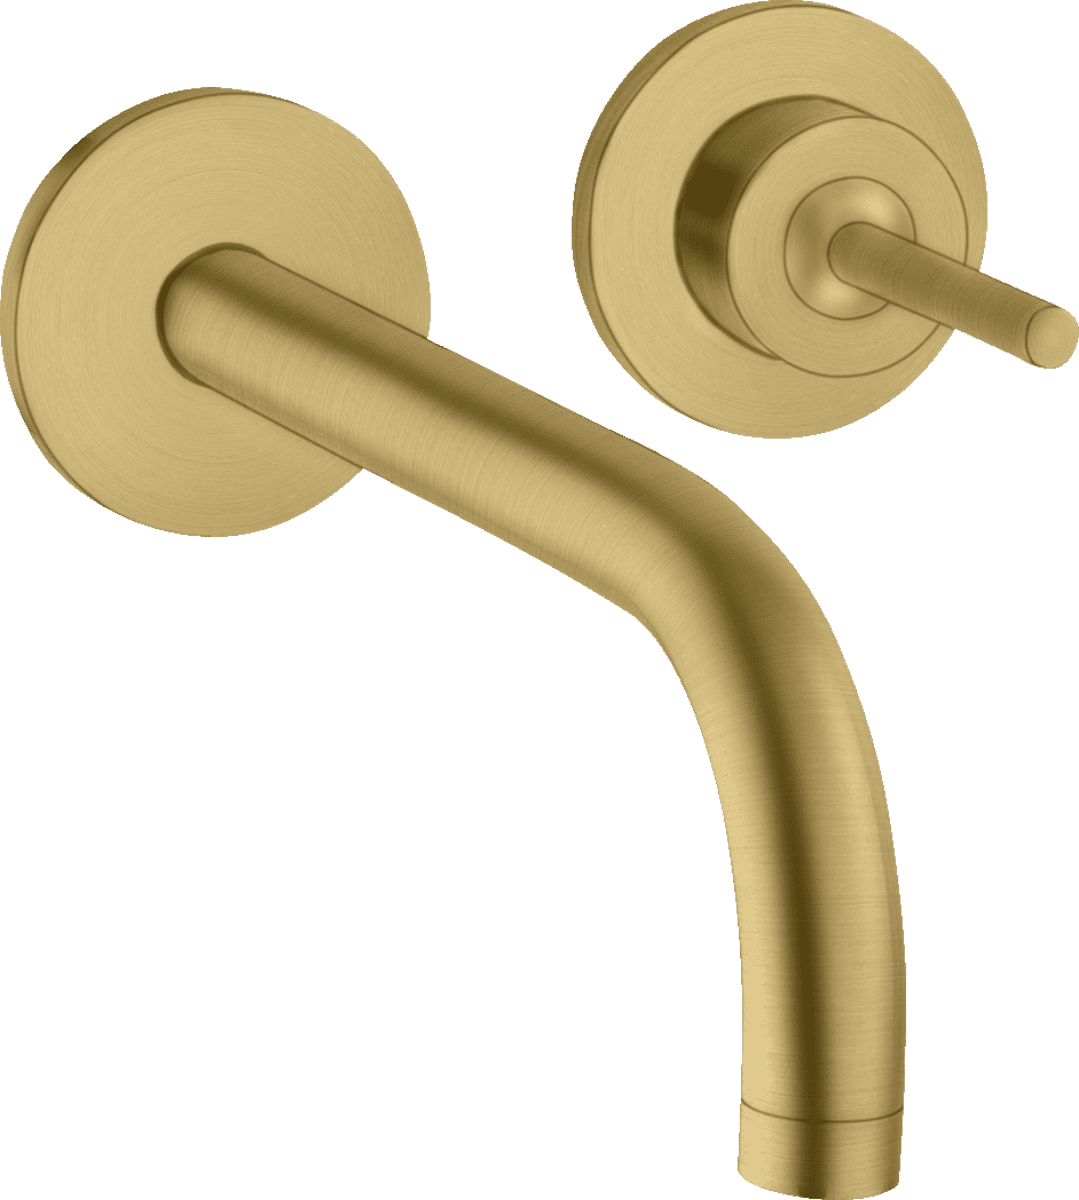 HANSGROHE AXOR Uno Single lever basin mixer for concealed installation wall-mounted with spout 225 mm and escutcheons #38116250 - Brushed Gold Optic resmi